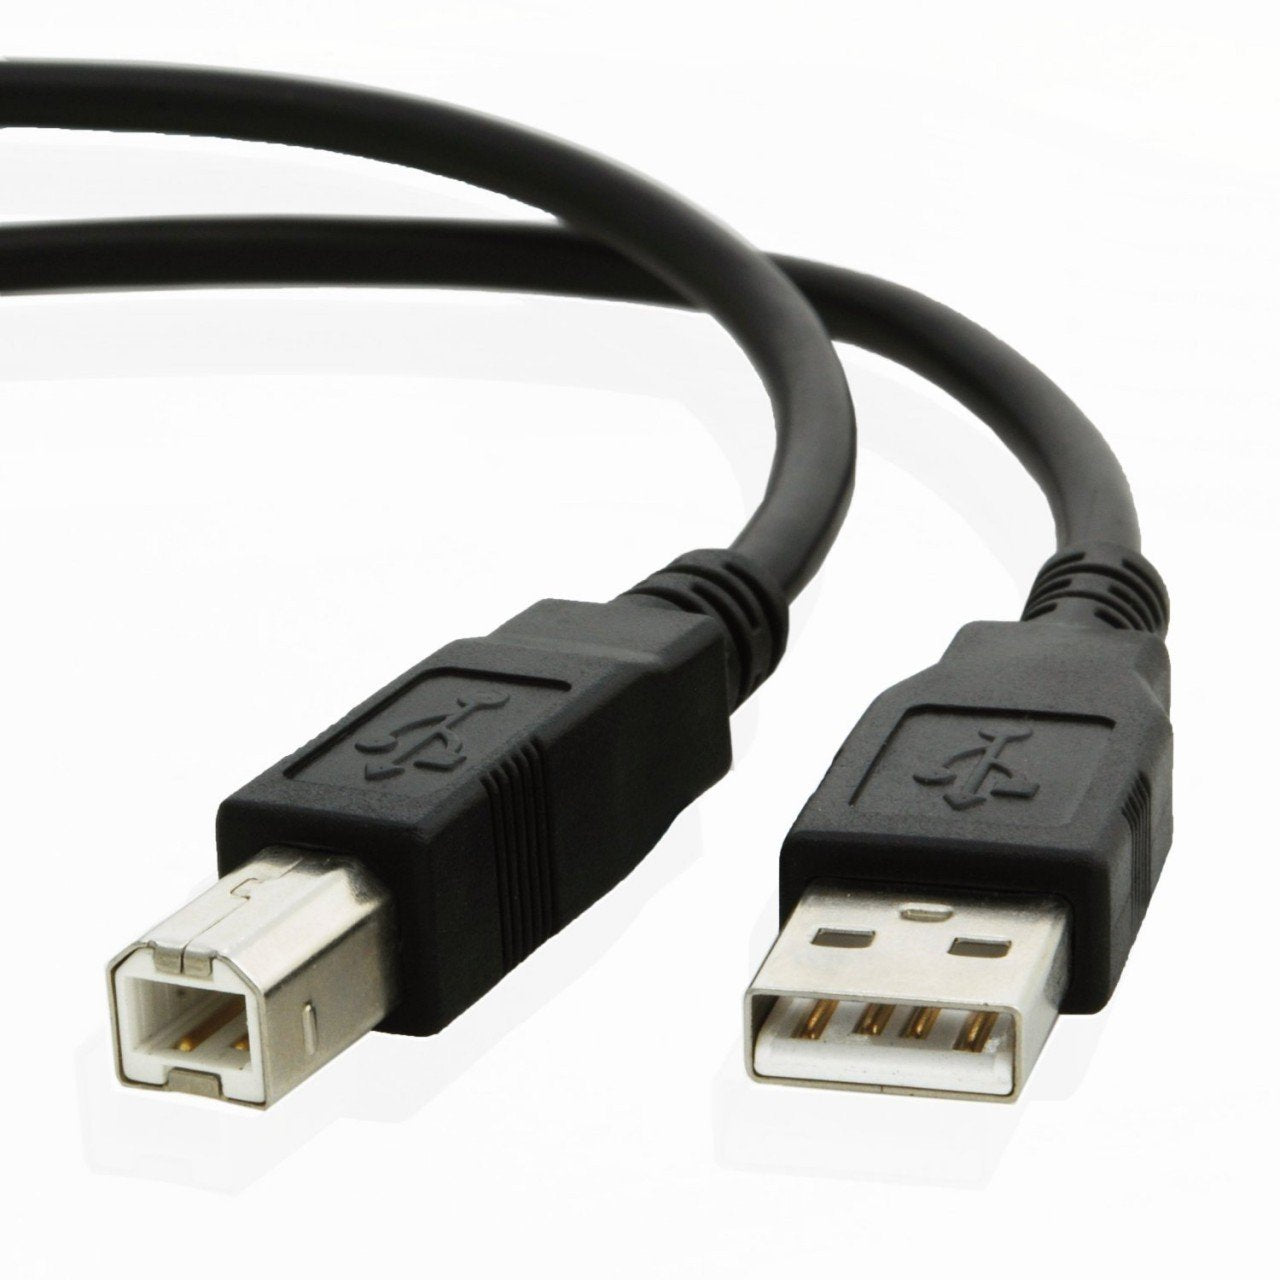 USB cable for Epson EXPRESSION XP-440